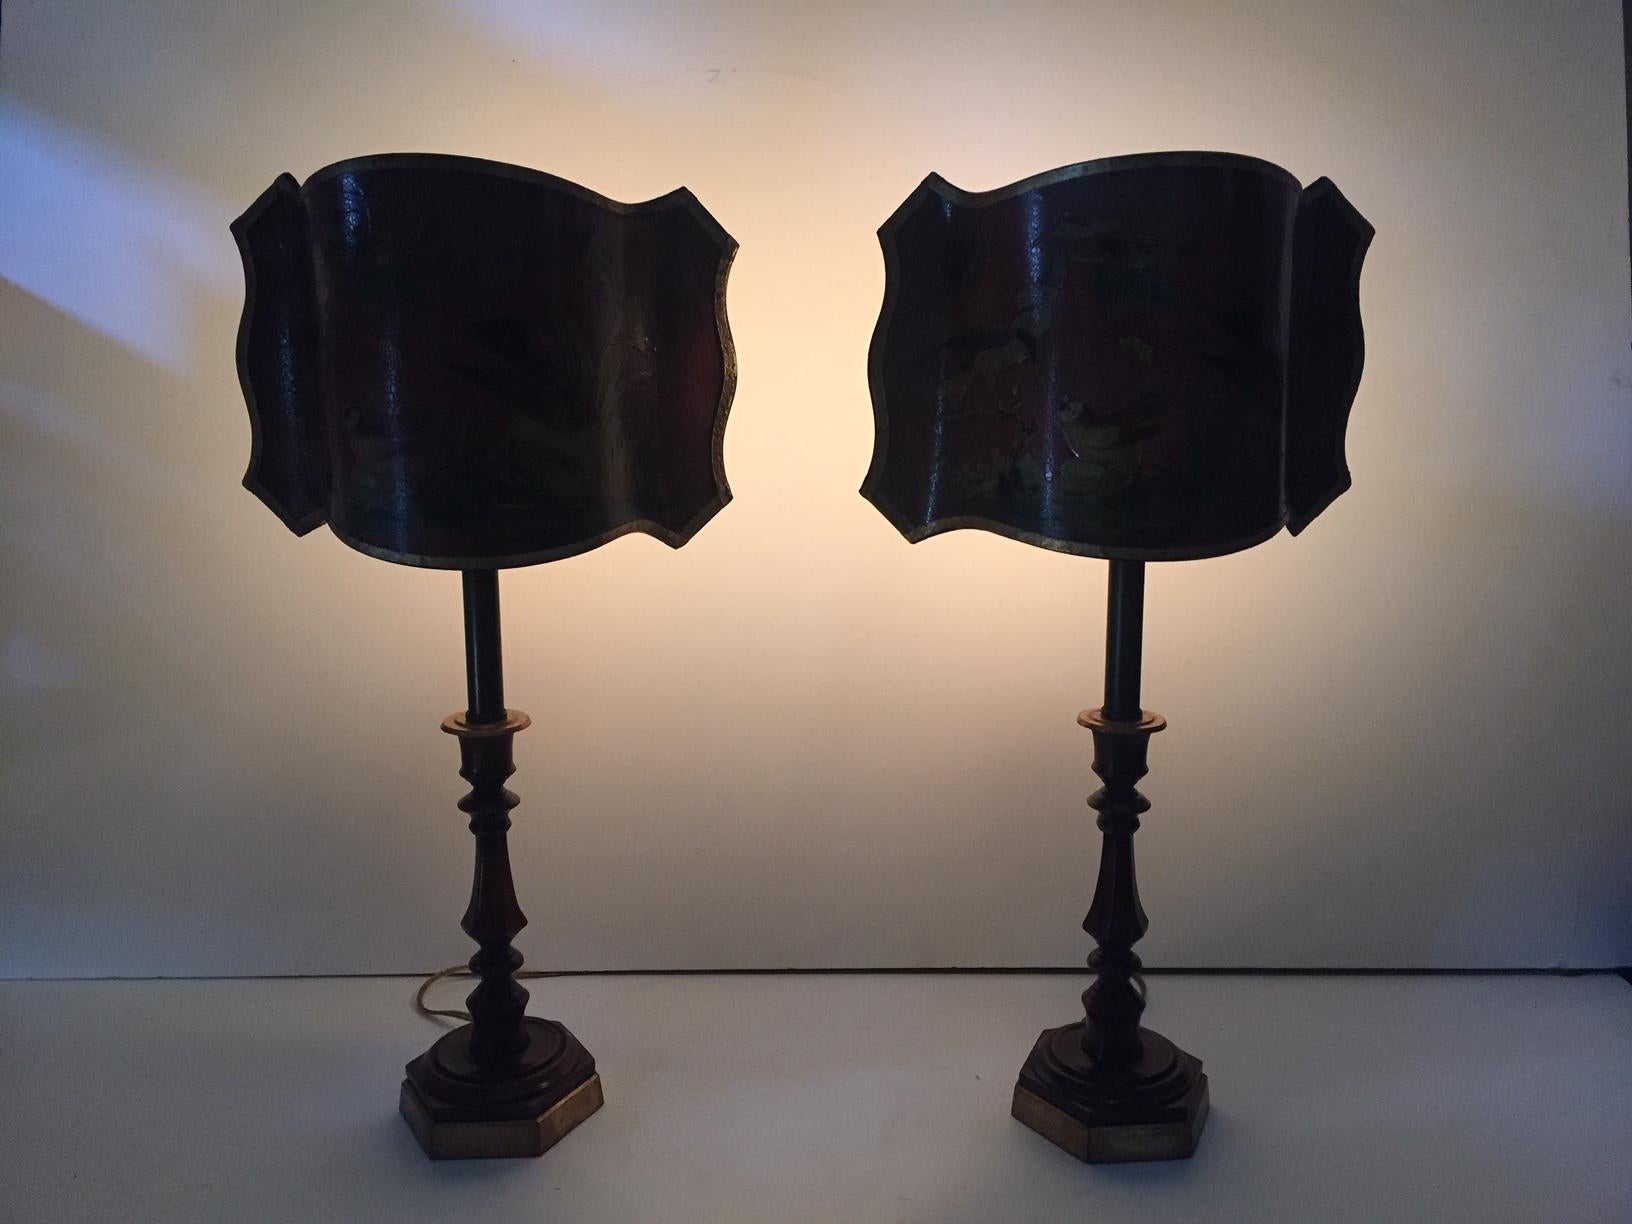 Wonderful Pair of Dark Red Candlestick Table Lamps with Fancy Decoupage Shades 8